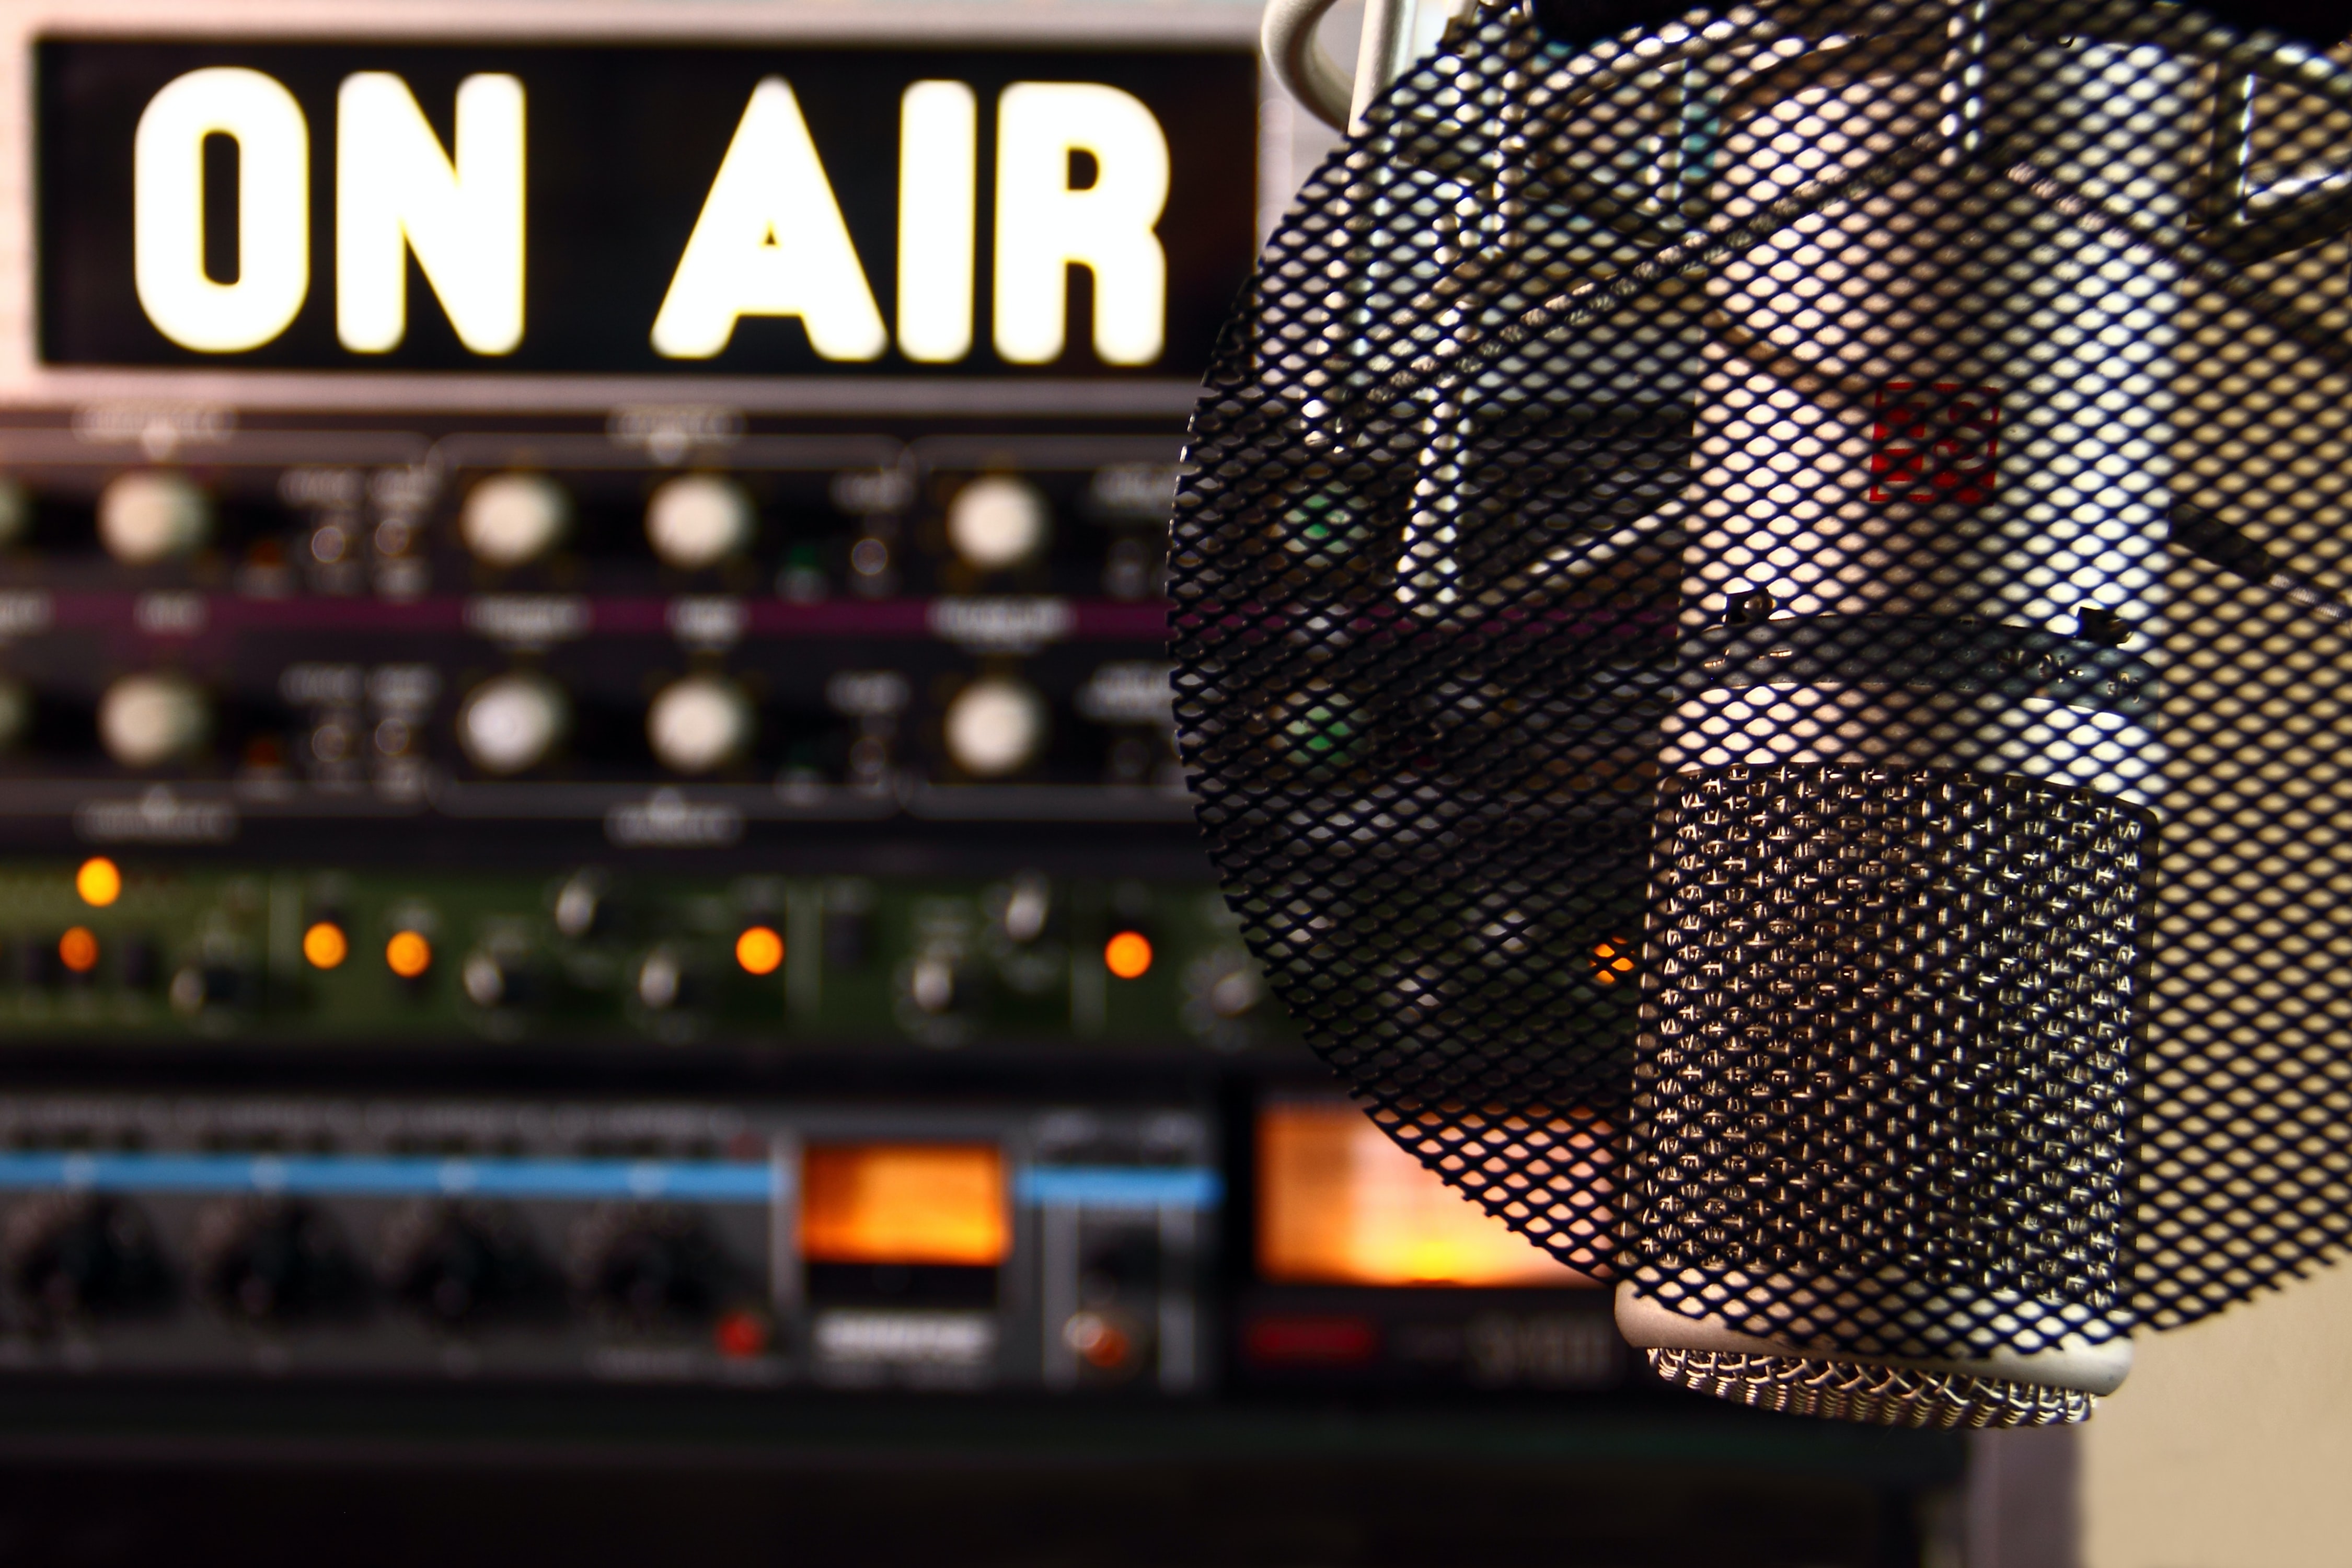 A radio show setup: On Air sign is on behind a microphone 